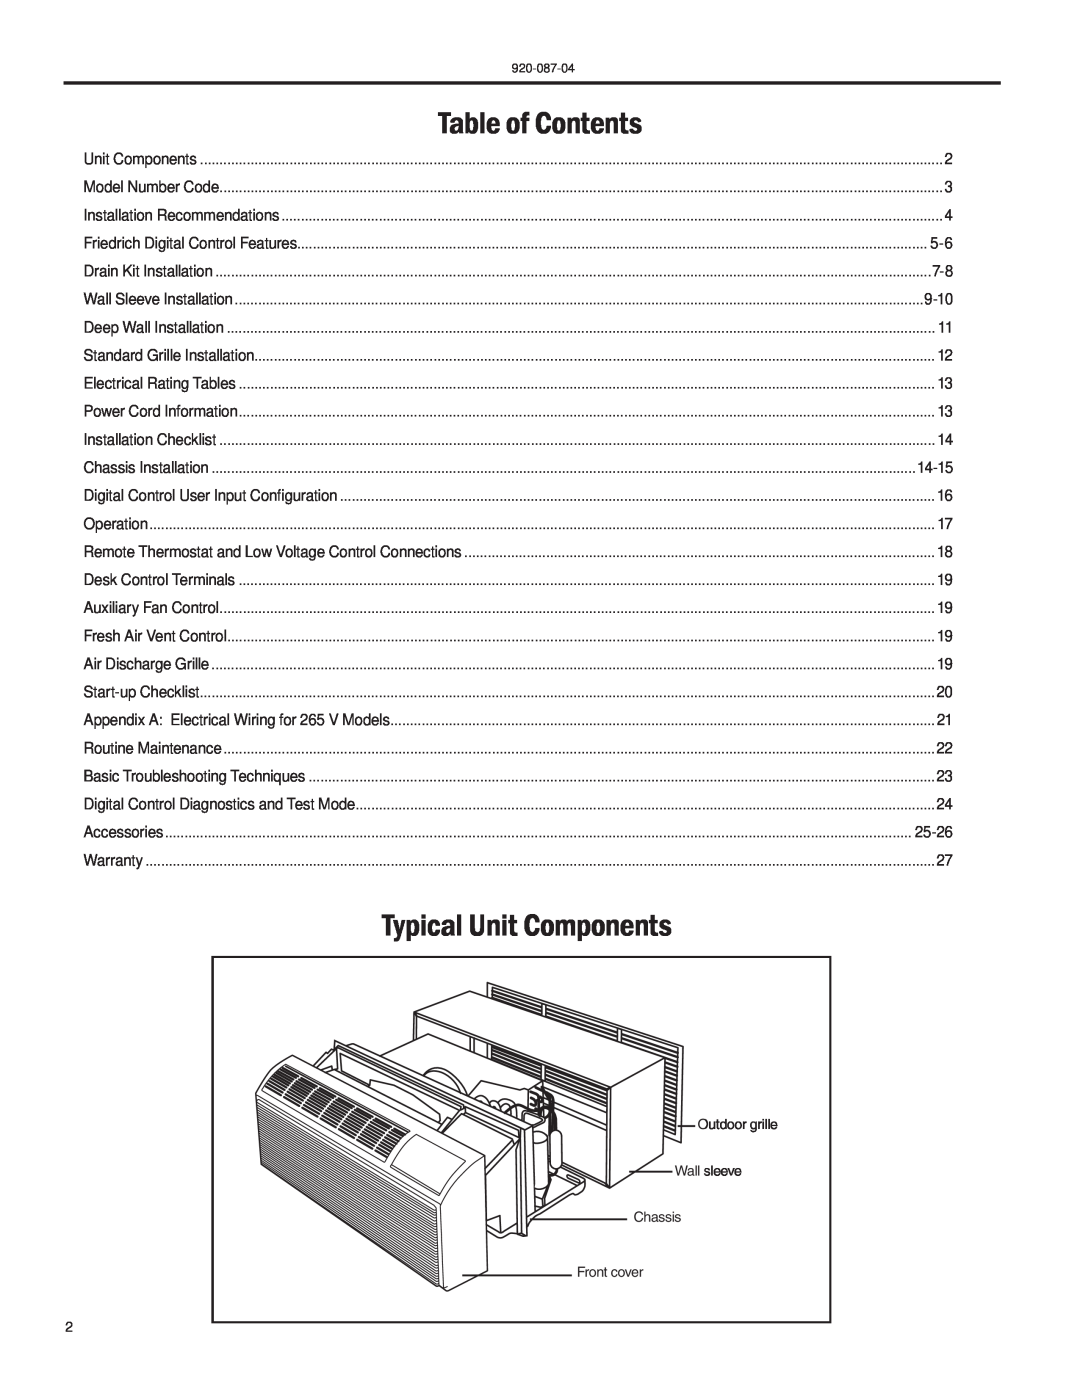 Friedrich HEAT PUMPS manual Table of Contents, Typical Unit Components, Outdoor grille Wall sleeve Chassis Front cover 